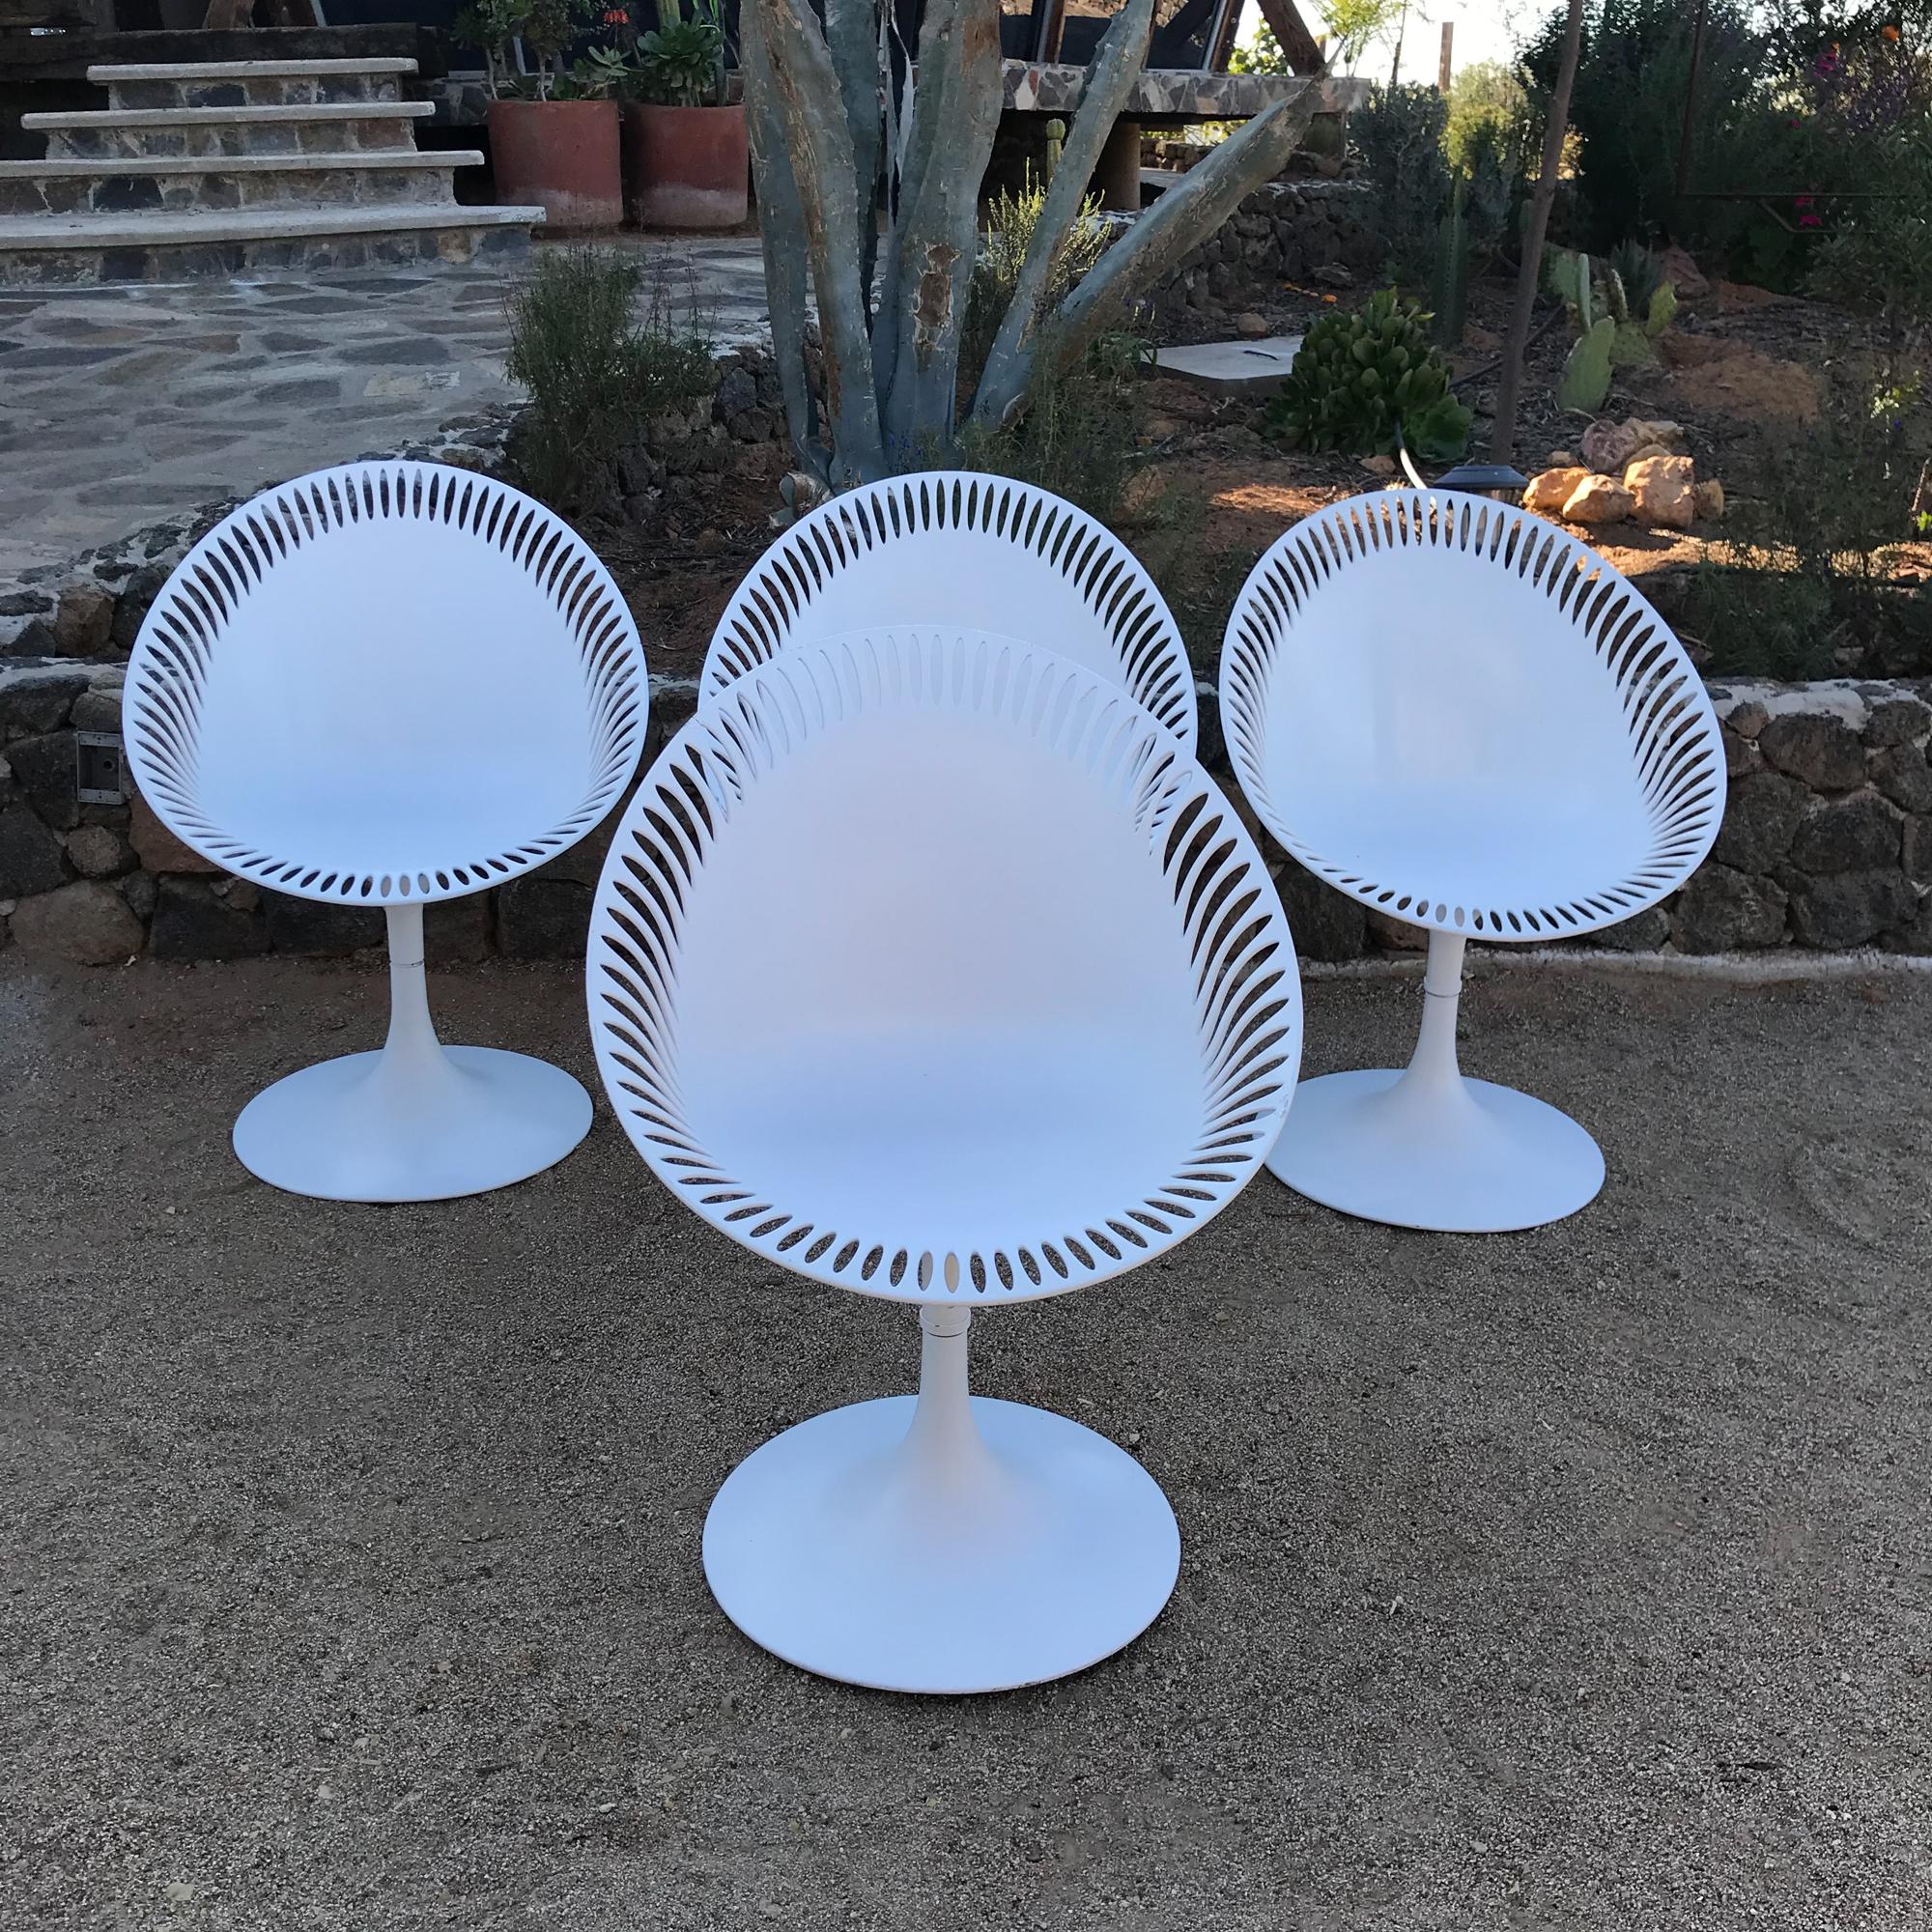 Set of Four White Sculptural Fiberglass Chairs with Tulip base. 
Atomic Space Age vibe 1970s
No label present. 
In the style of Knoll Saarinen and Philippe Starck for Kartell.
27 W x 24 D x 36 H  Seat 18.5 H
Original Unrestored Vintage Preowned